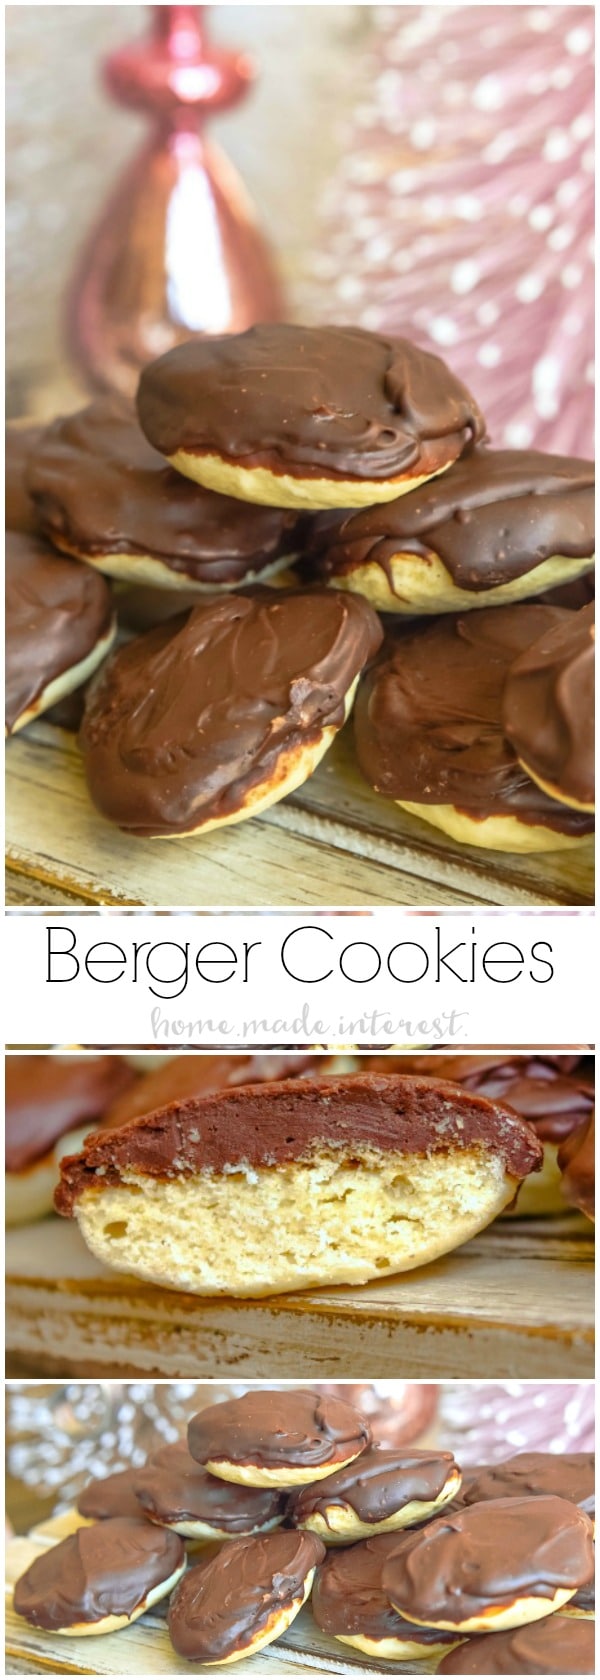 Berger cookies are a symbol of Maryland and if you haven’t had one you need to try them! This delicious copycat Berger cookie recipe is a soft, cake-like cookie topped with a mound of rich fudge frosting. These Berger cookies make a great Christmas cookie recipe with a glass of milk. Santa will be so happy to see them!